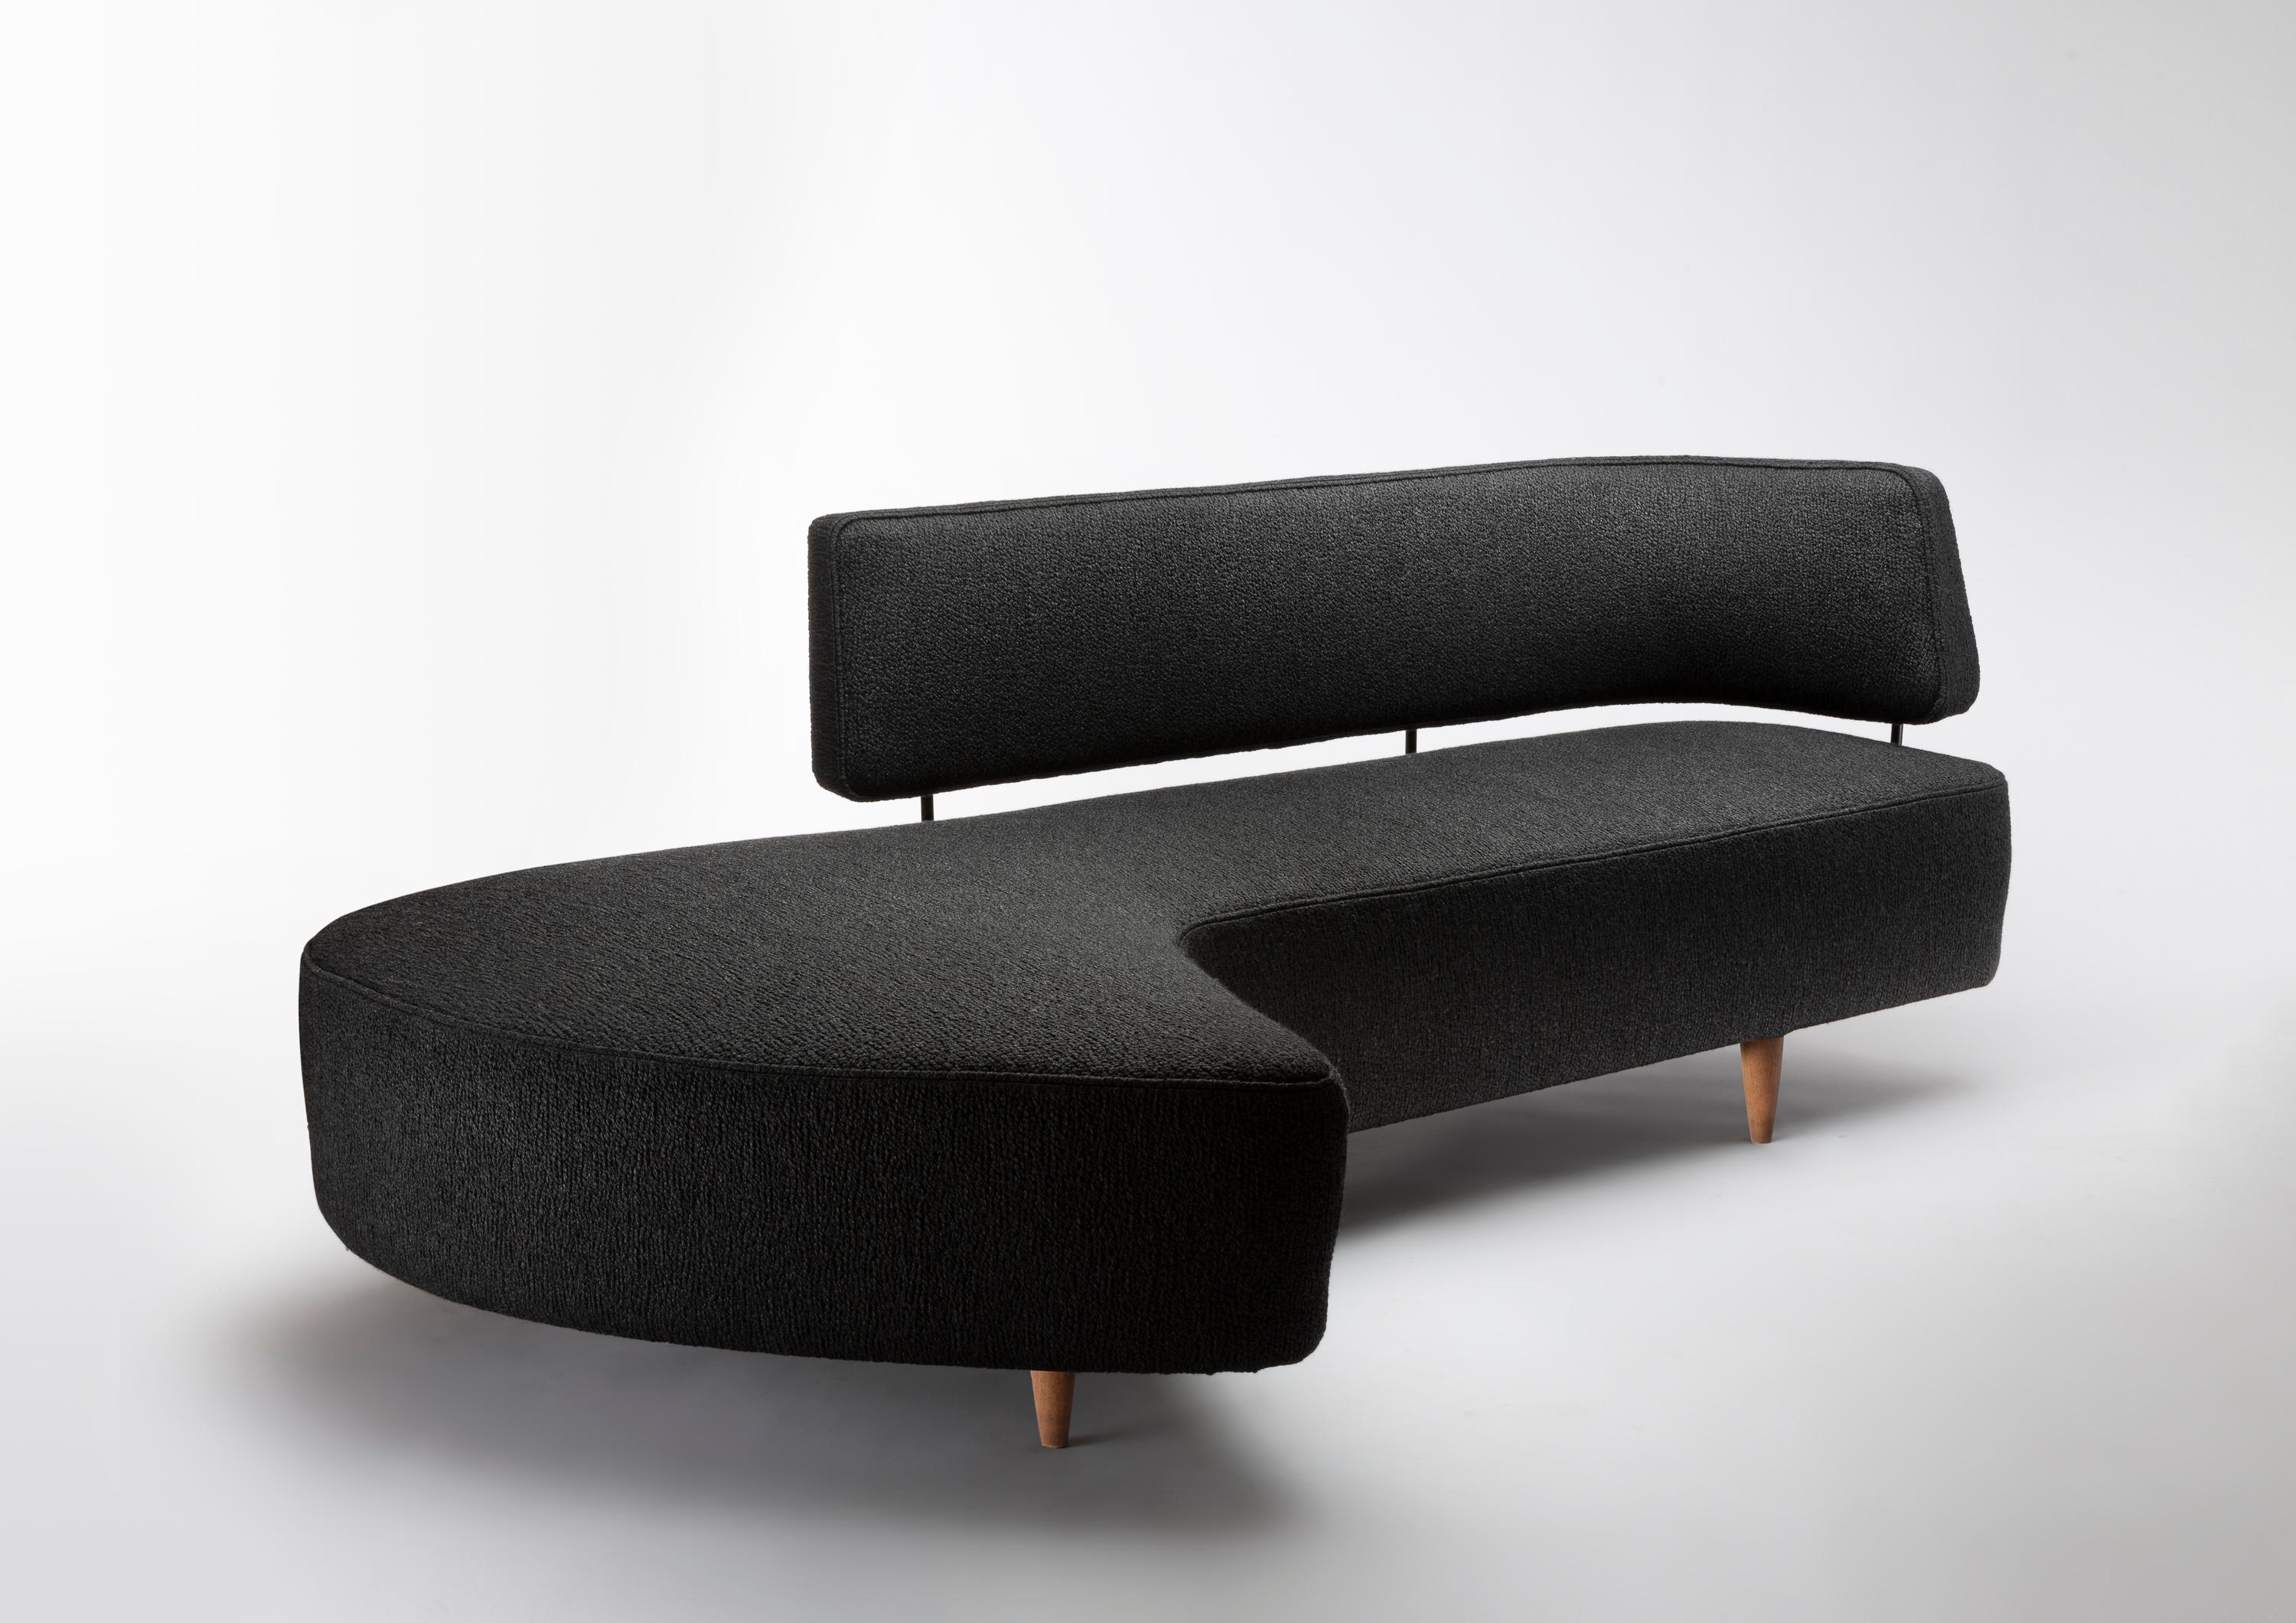 A rare freeform sofa by the Japanese designer Taichiro Nakai, in cherry wood, black lacquered metal and flecked fabric, manufactured by La Permanente Mobili, Italy, circa 1955
A similar model was designed for and shown during the exhibition “La